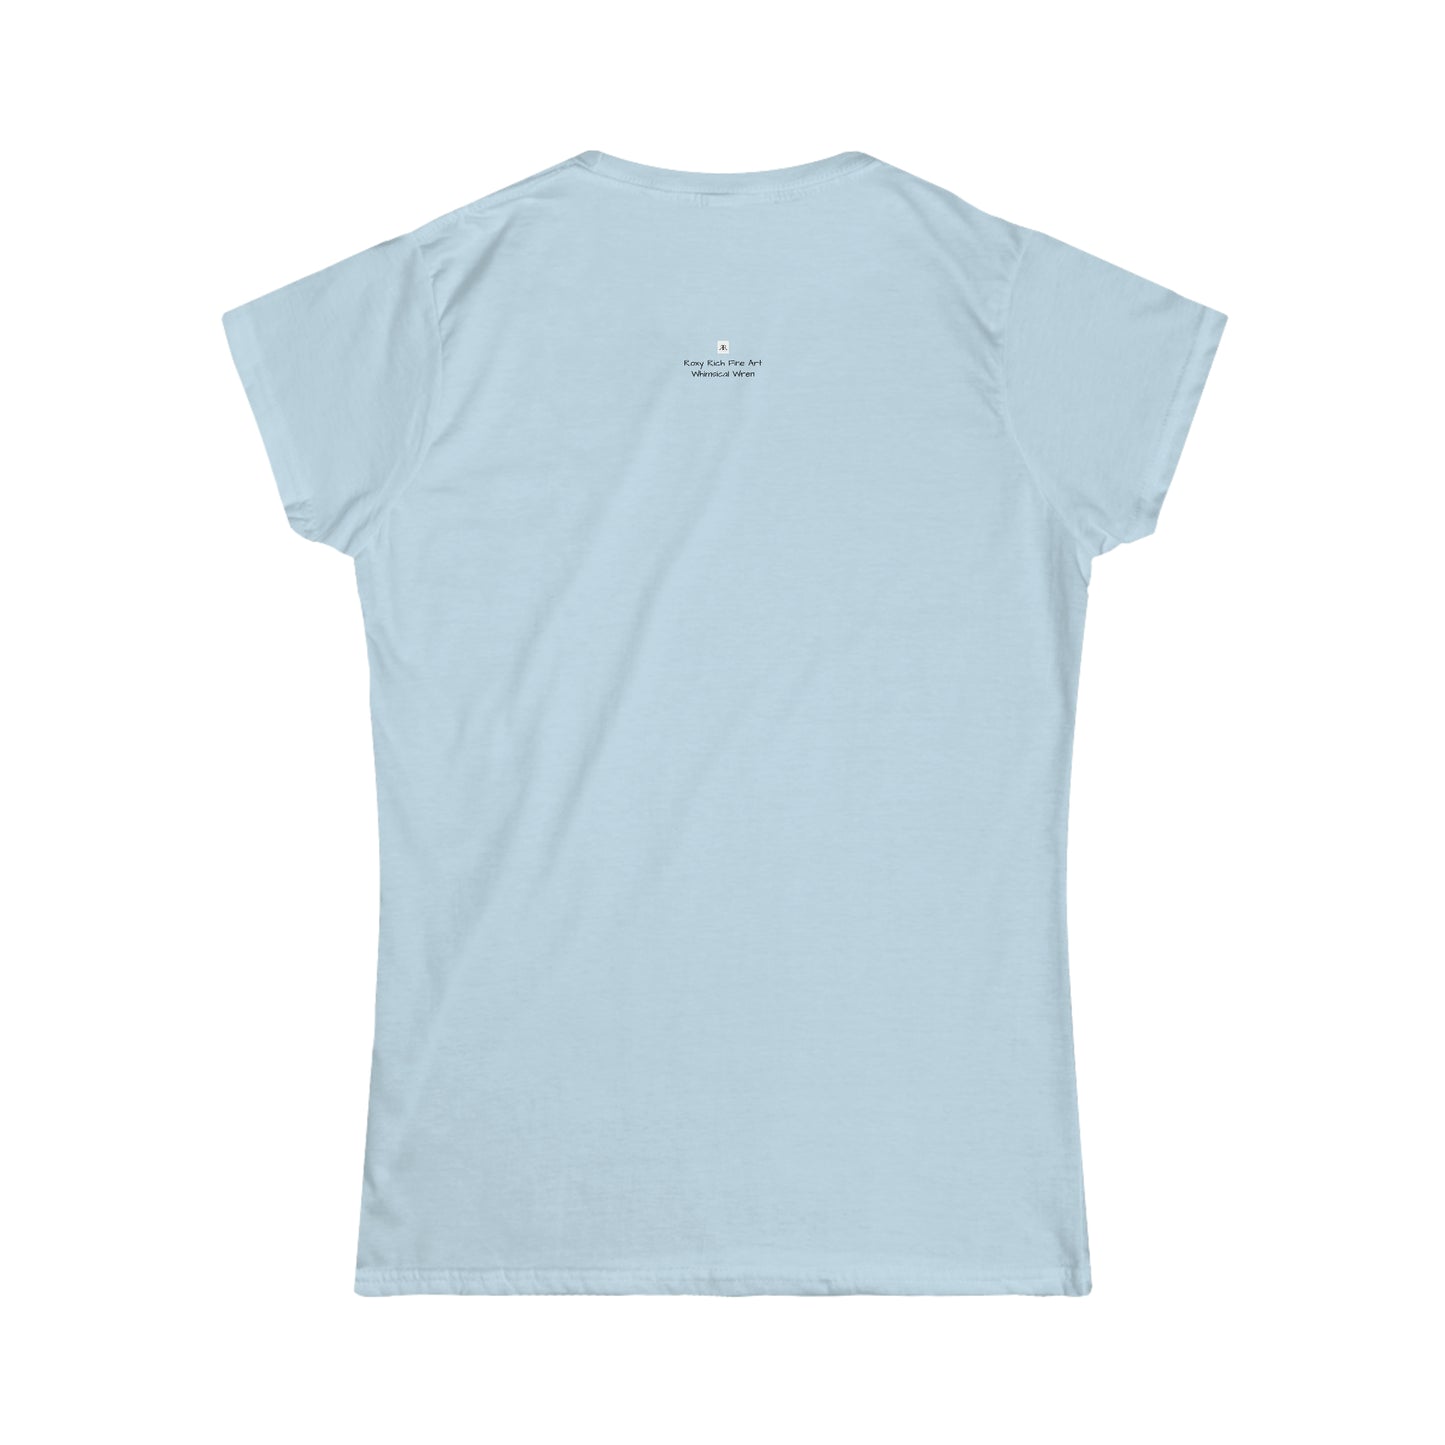 Whimsical Wren Bird Women's Softstyle  Semi-Fitted Tee